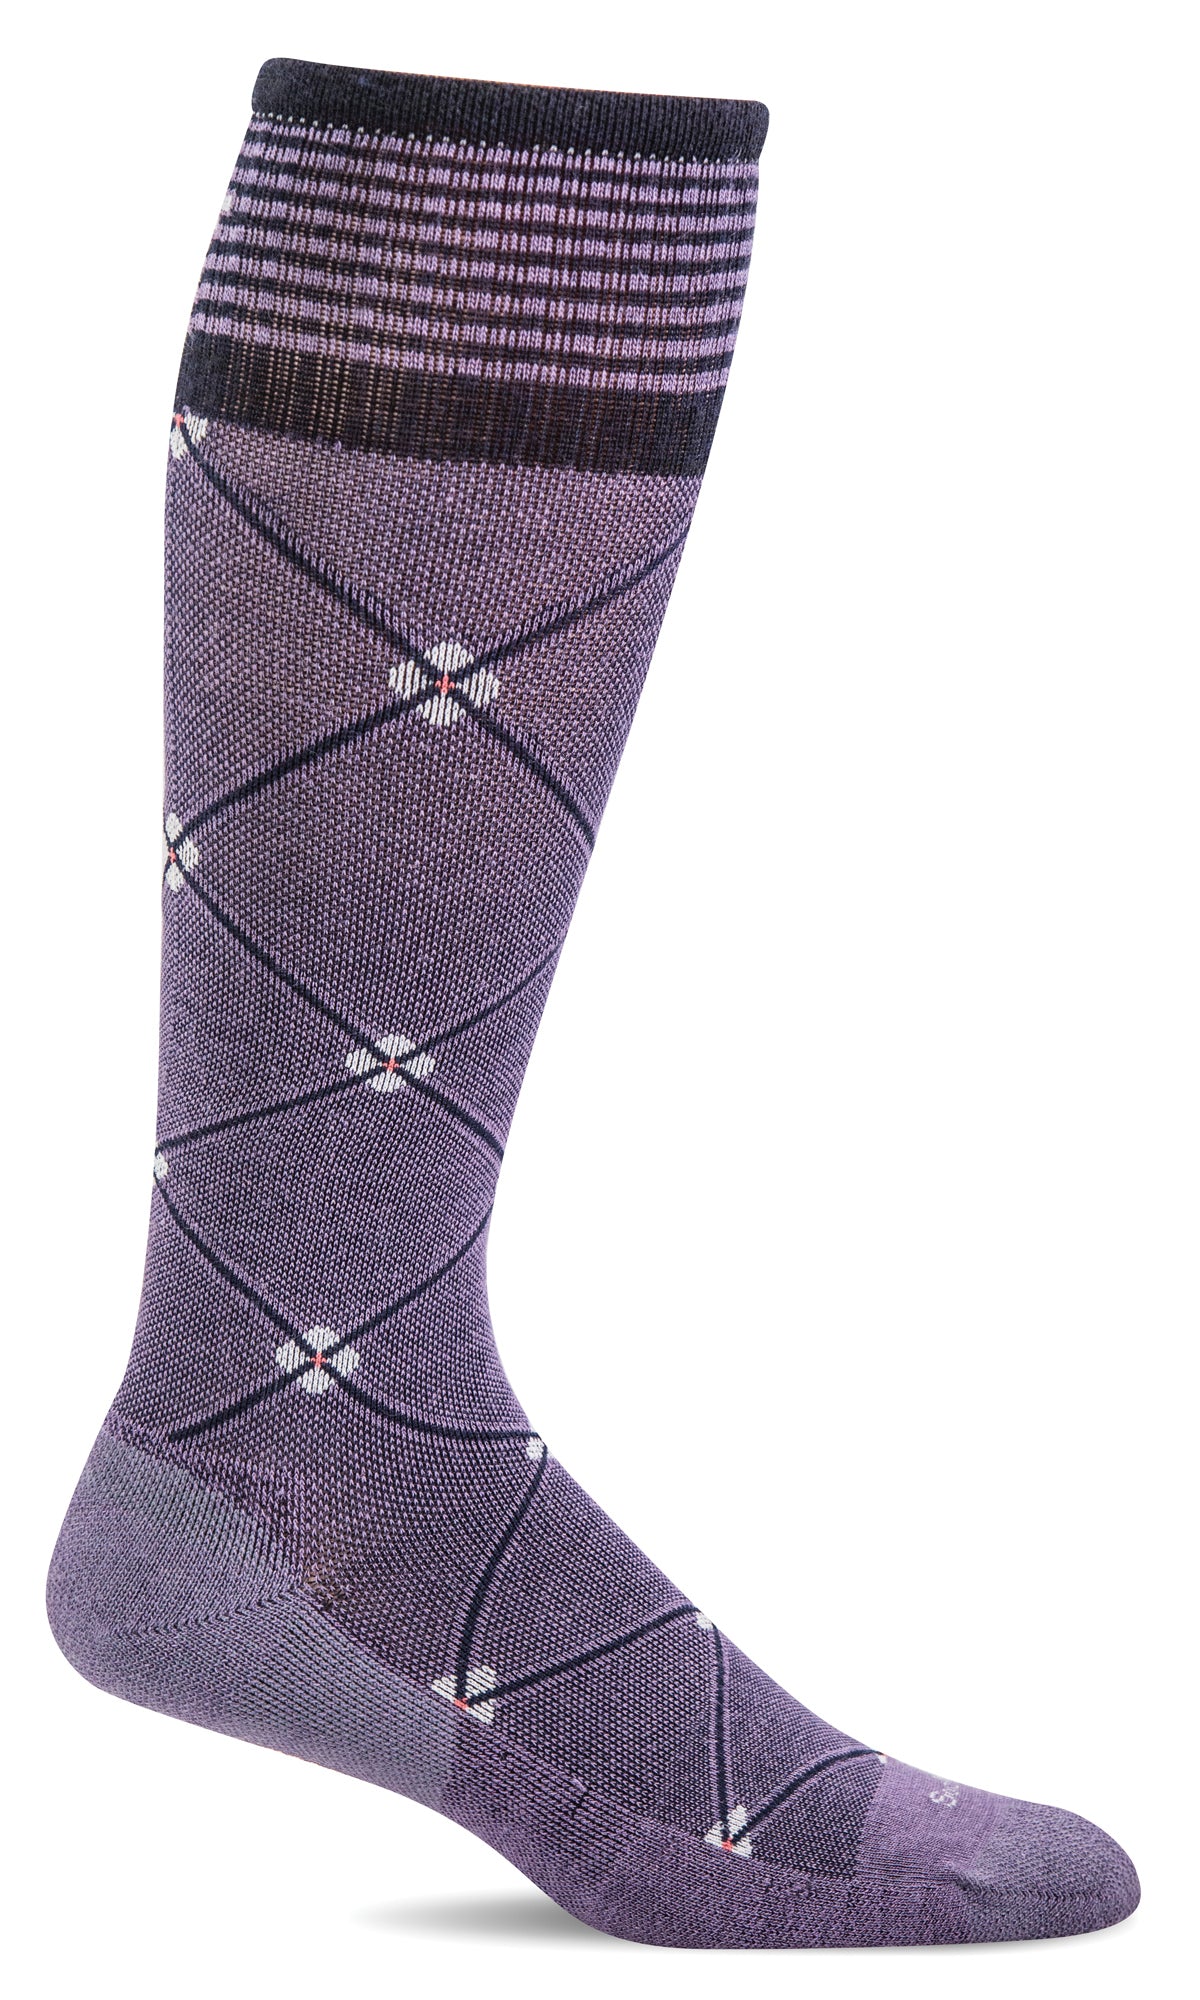 Sockwell Women's Elevation Sock in Plum color from the side